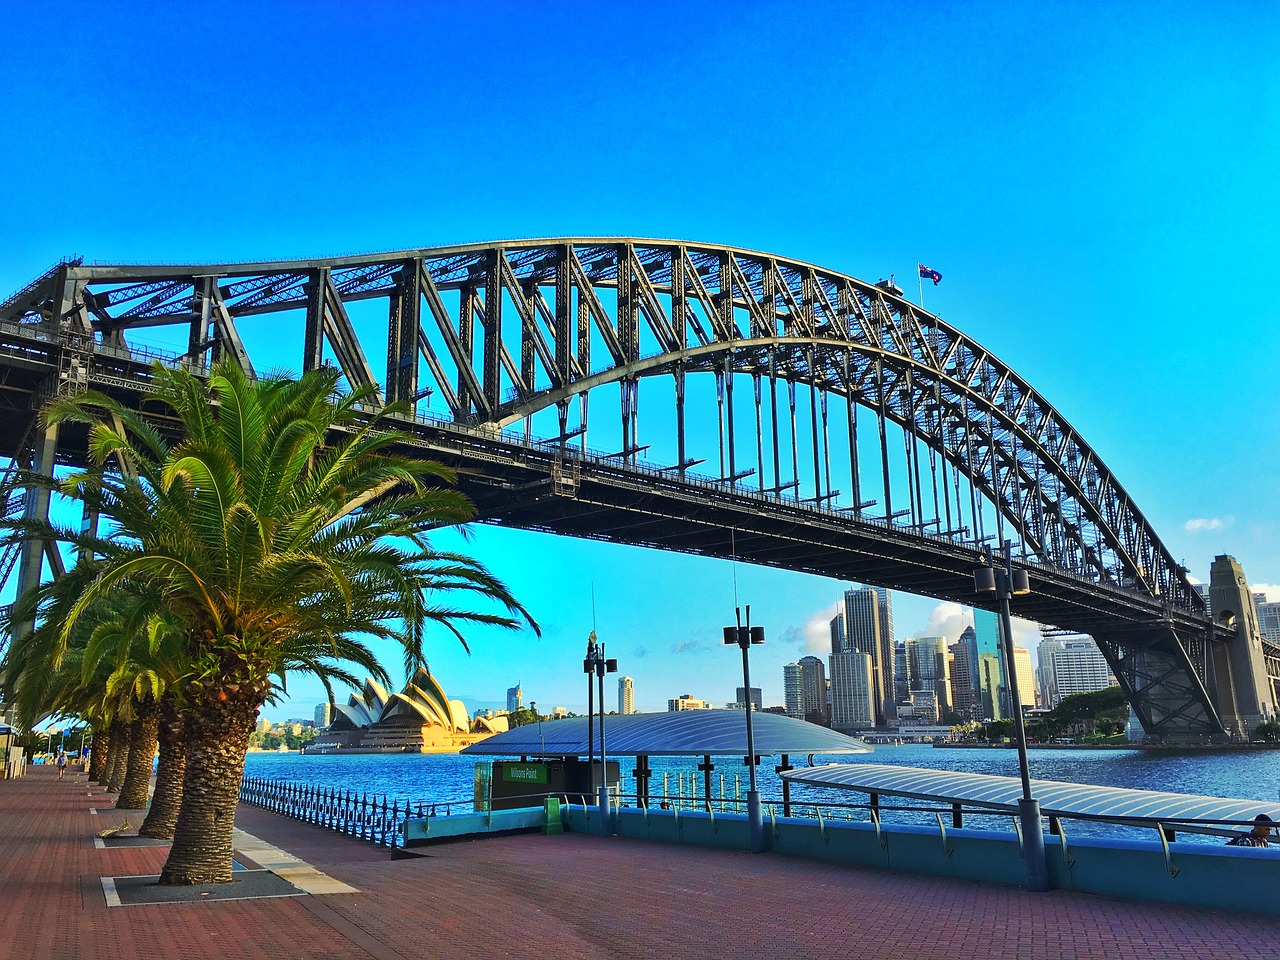 Sydney Harbour Bridge - one of the Sydney points of interest you must visit. Read this article and learn the top things to do in Sydney and usedul tips for visiting Sydney from a local. #sydney #sydneytrip #sydneyattractions #sydneyaustralia #australiatravel #sydneytravel 